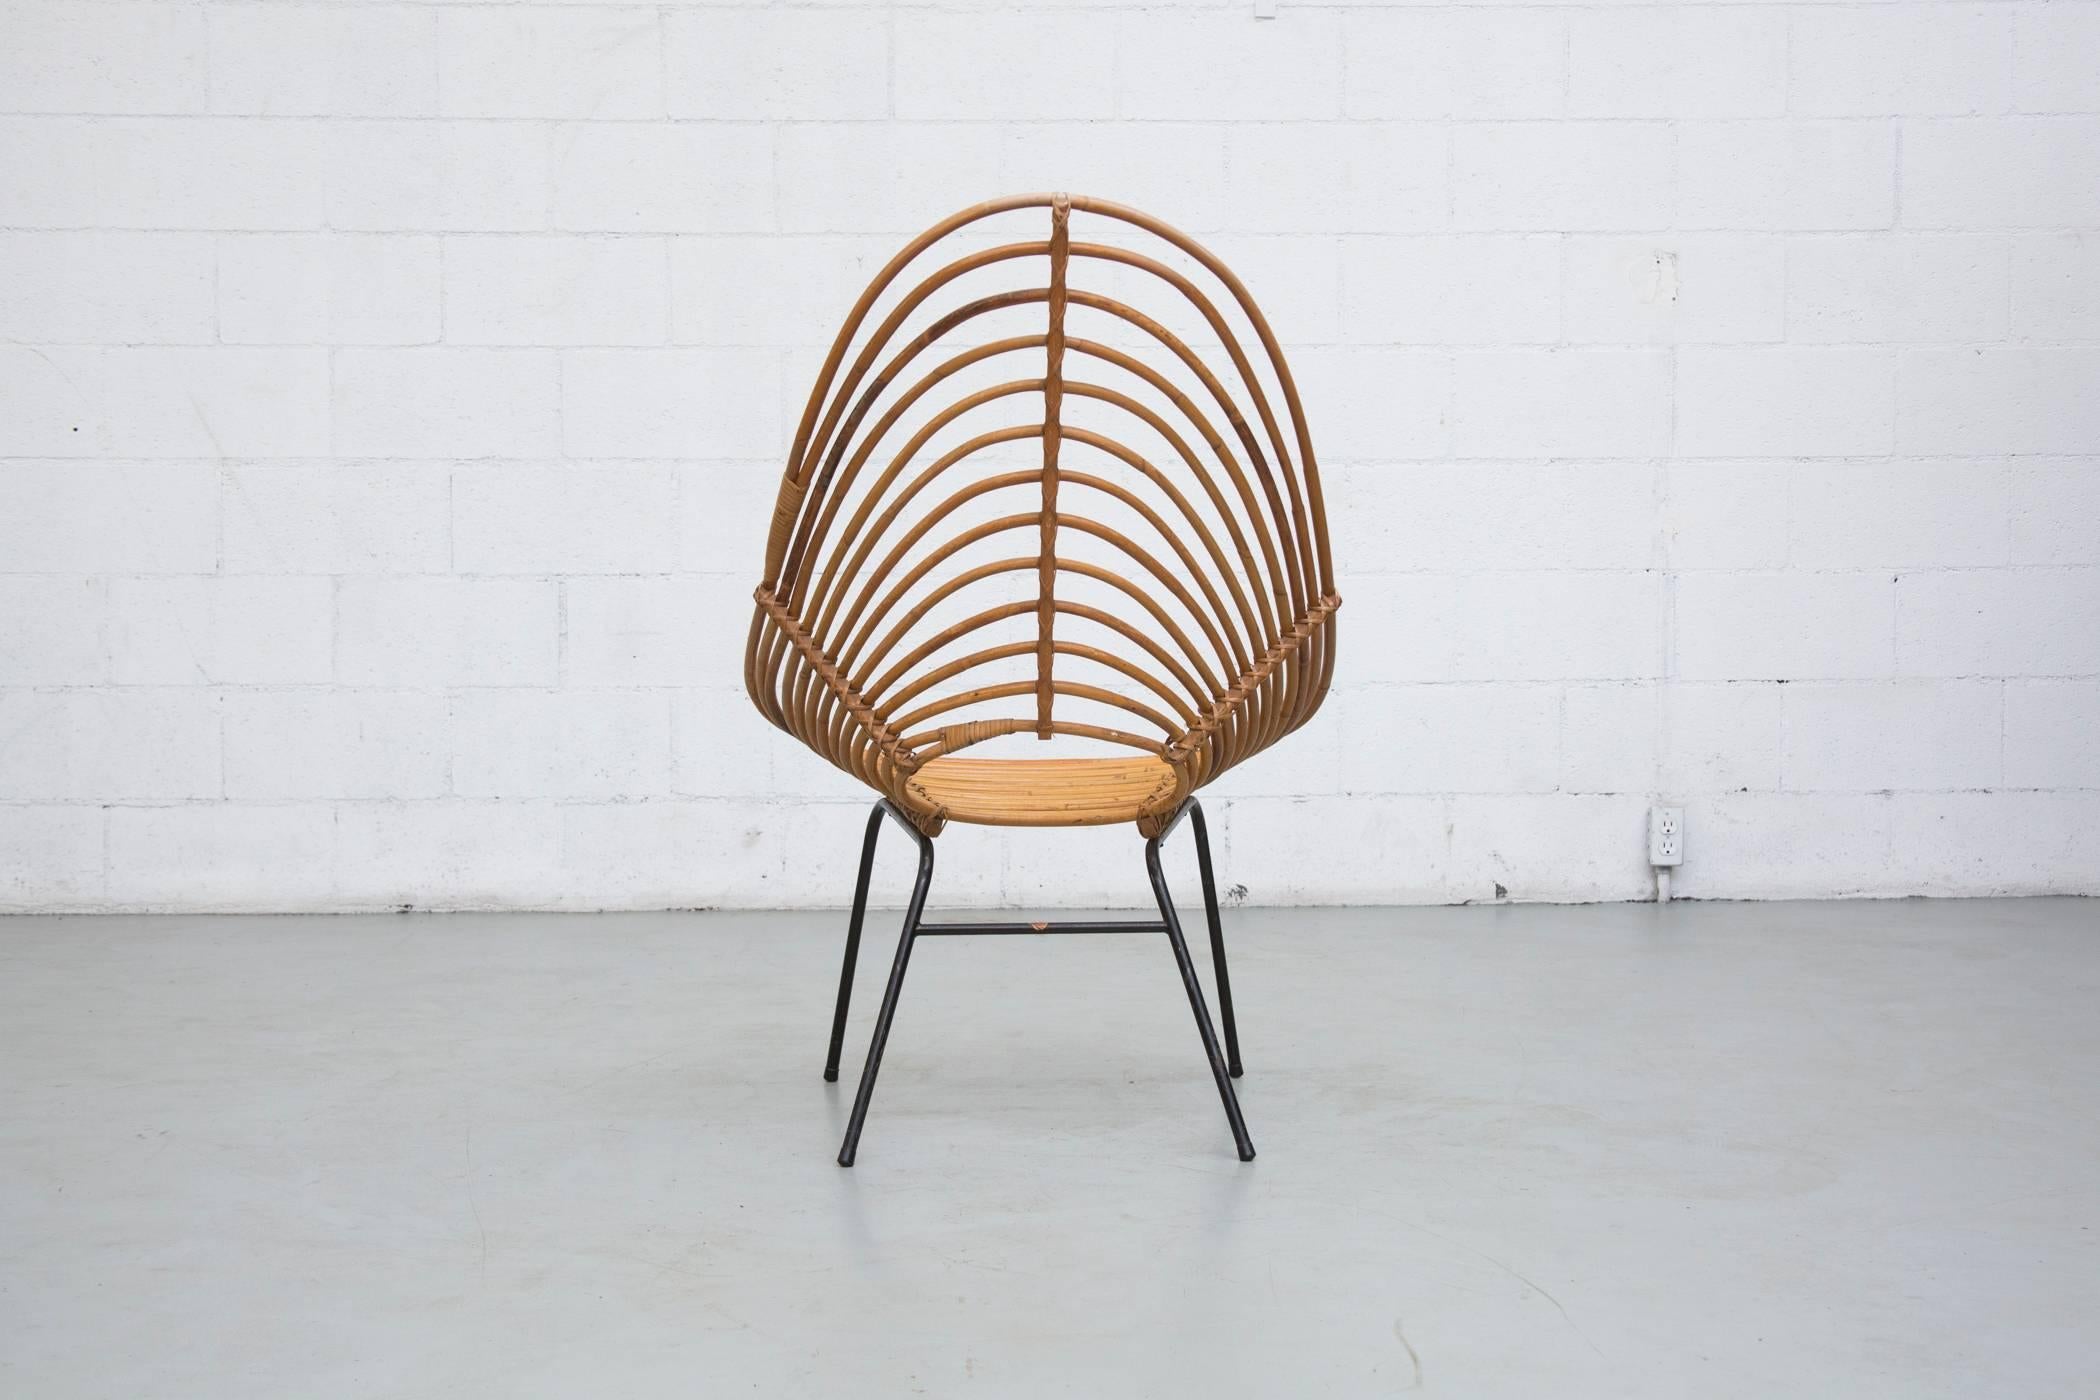 Enameled Onion Skin Patterned Tall Bamboo Lounge Chair